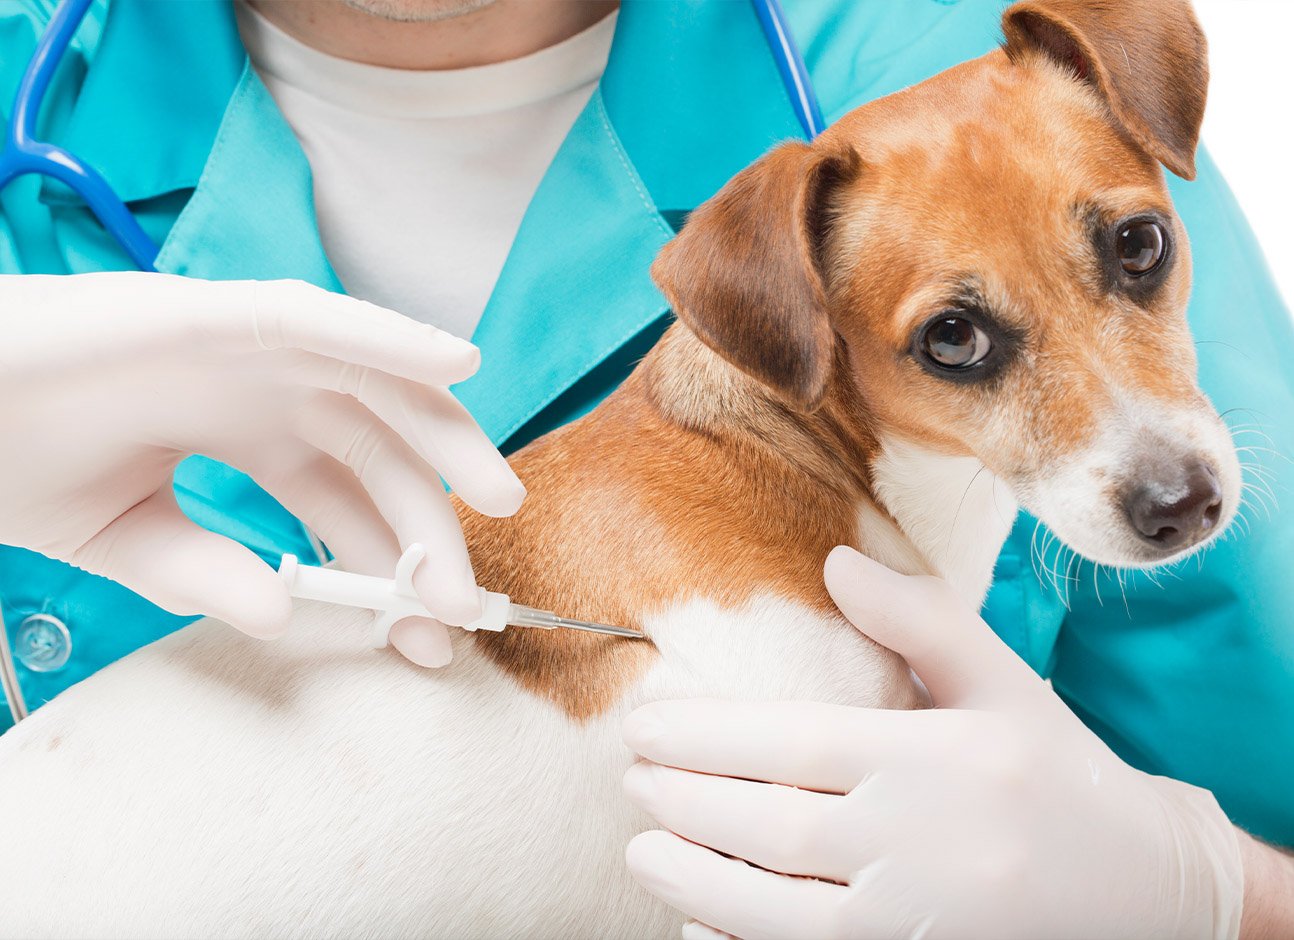 MICROCHIPPING YOUR PETS